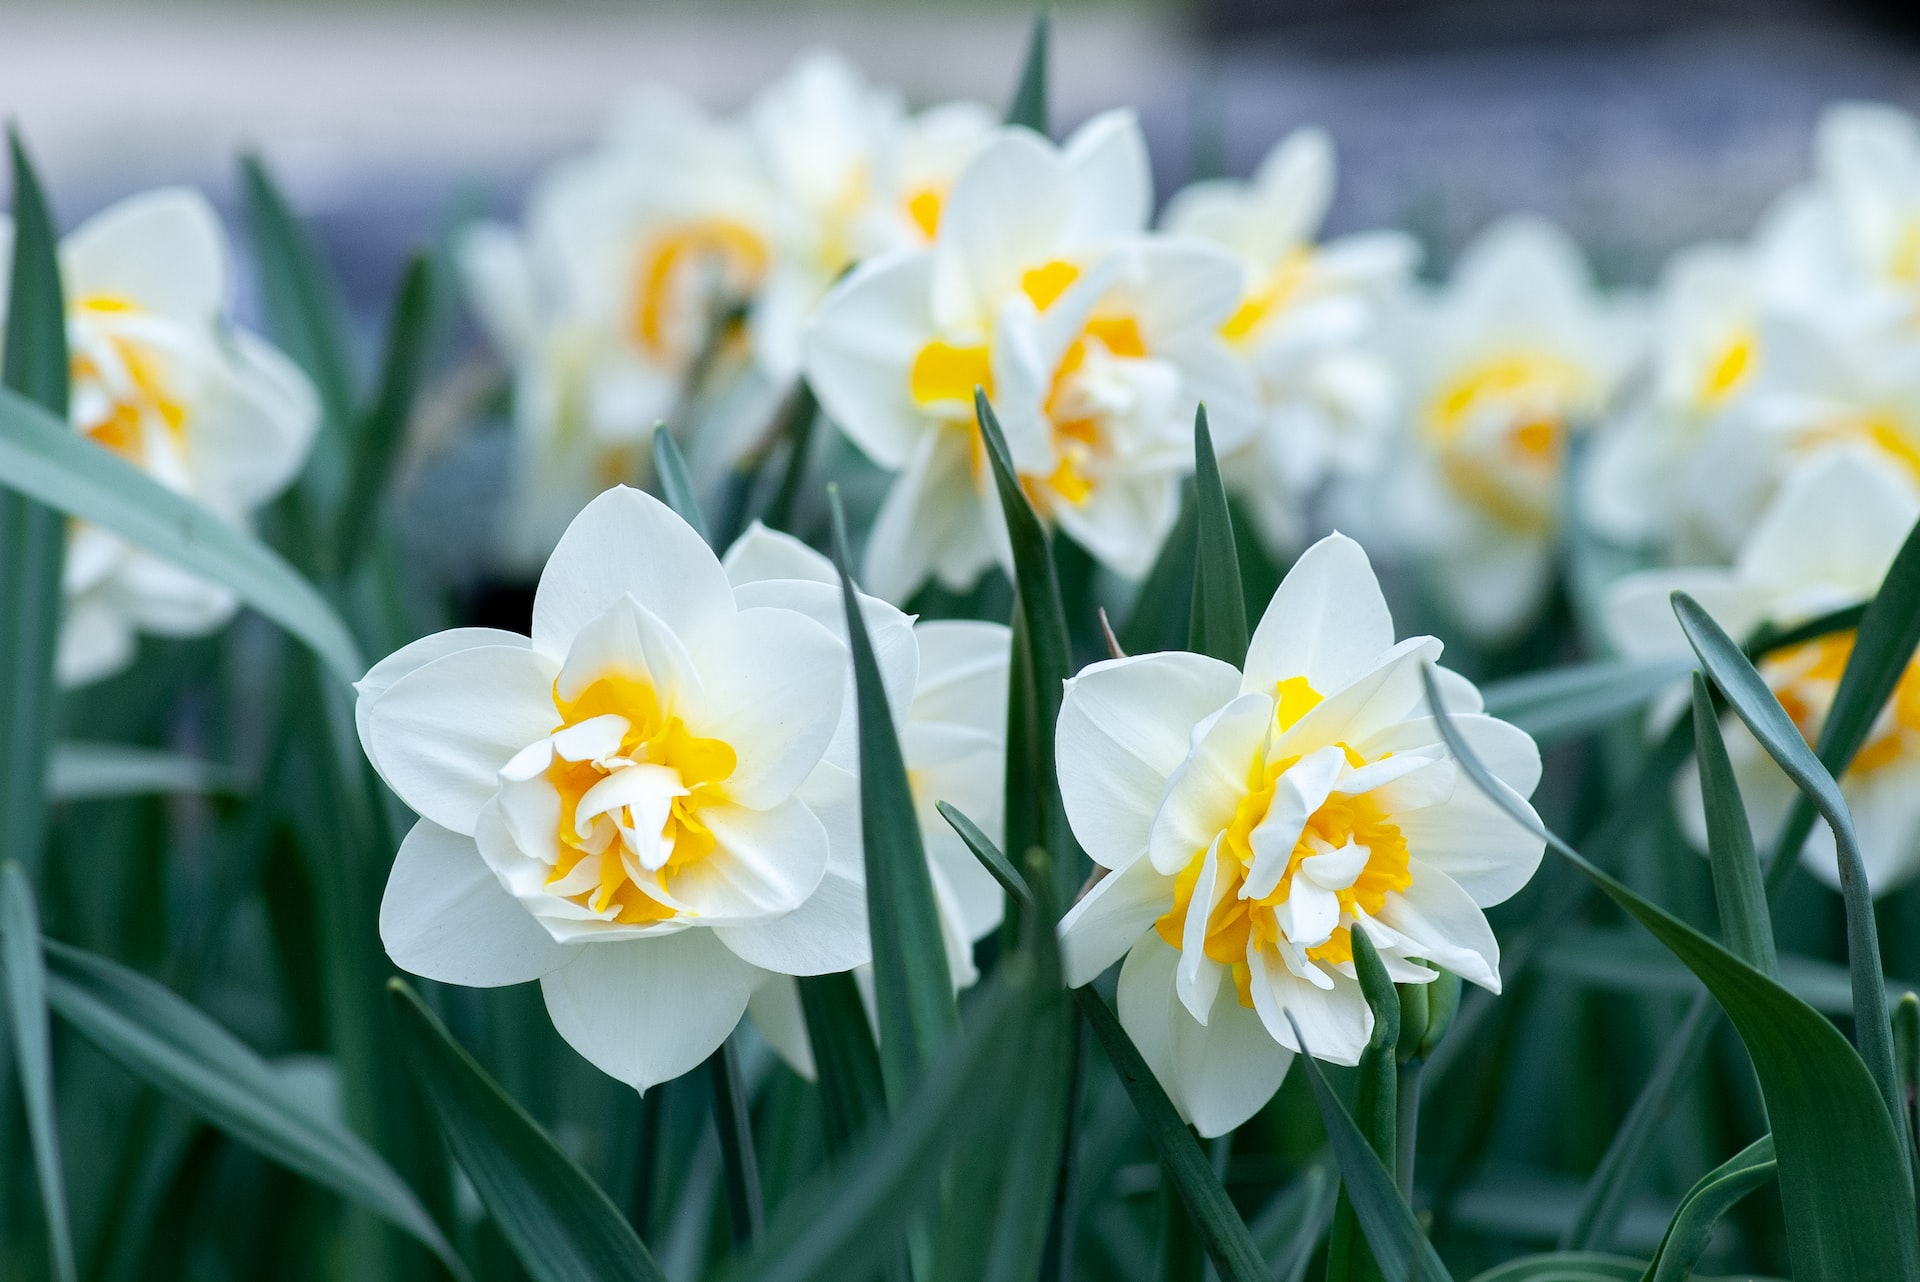 <strong></noscript>Bring the Sunshine: What to do with daffodils after flowering</strong>